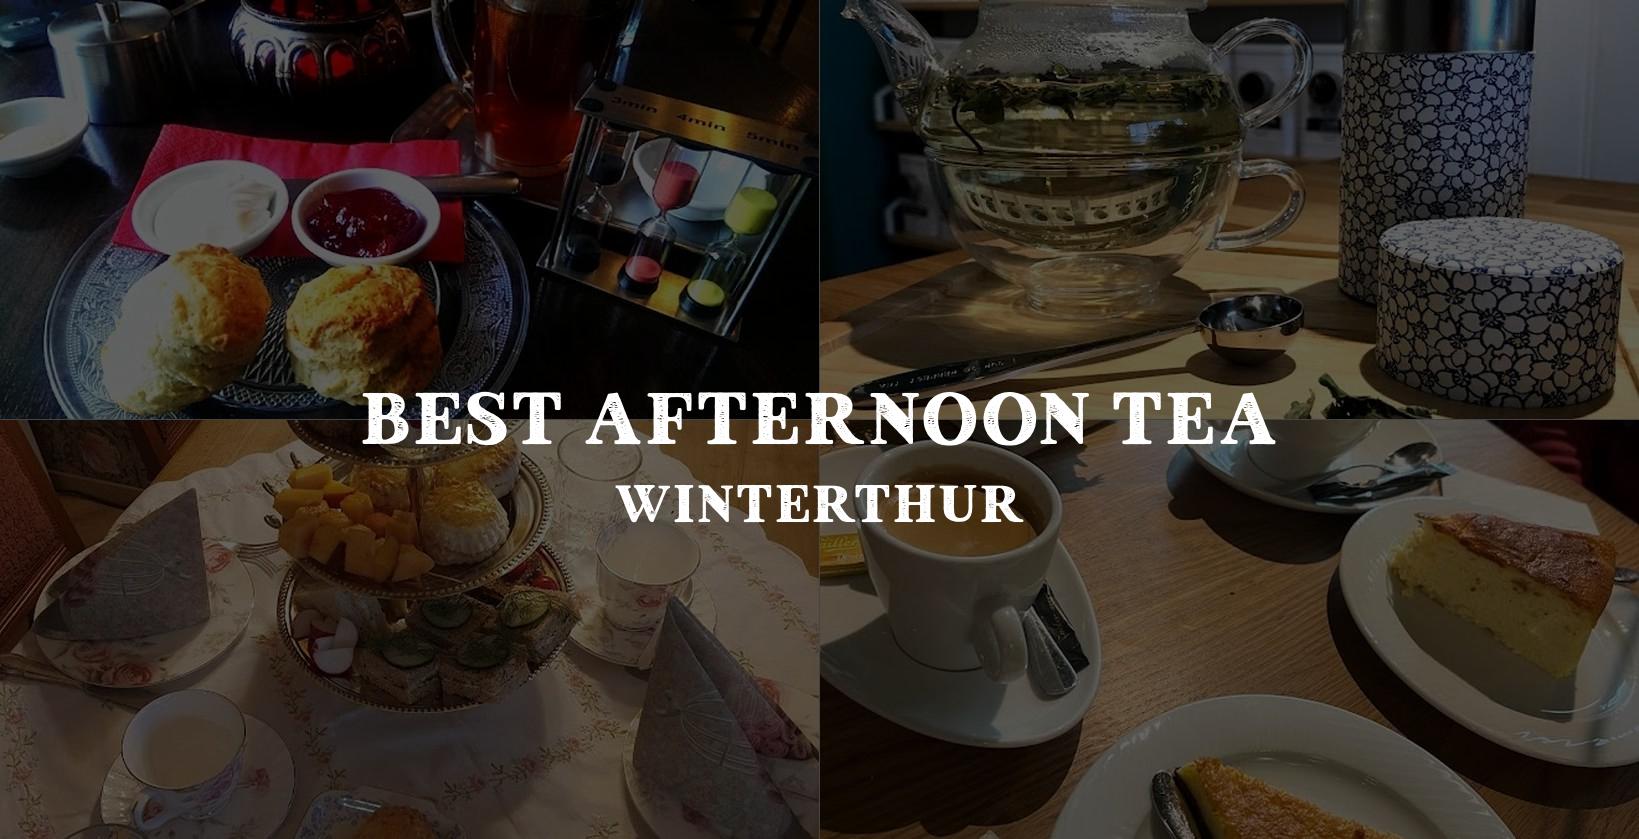 Choosing the perfect spot for afternoon tea in Winterthur